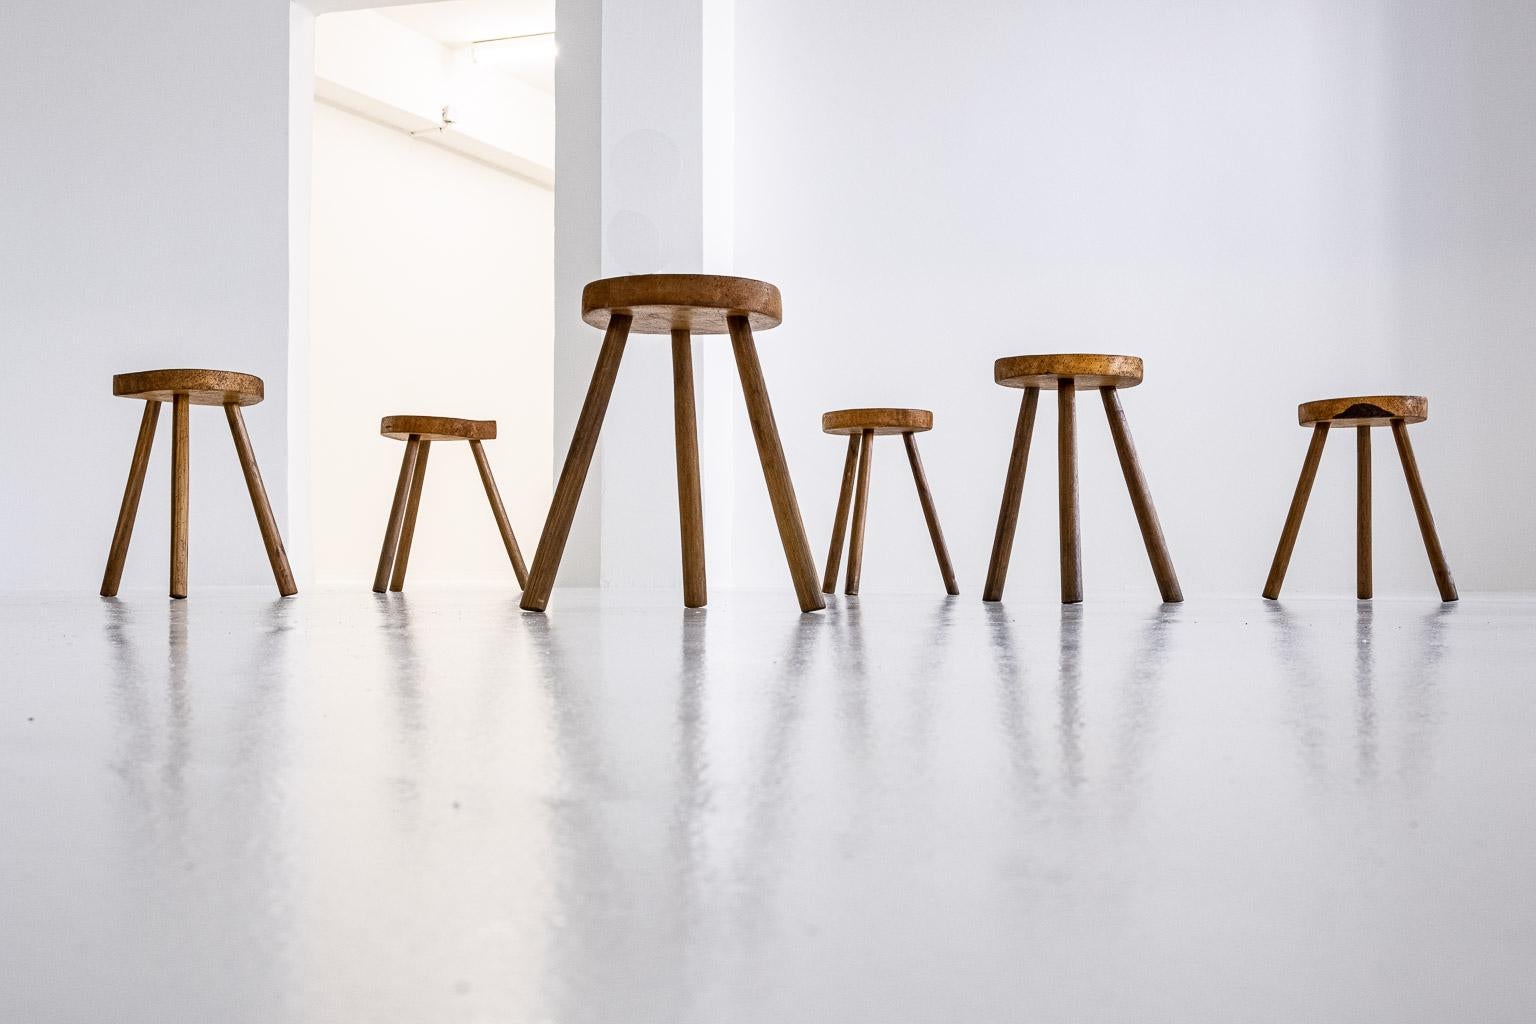 Set of 6, Wooden, Brutalist Tripod Stools or Side Tables, Italy, ca. 1960s For Sale 1